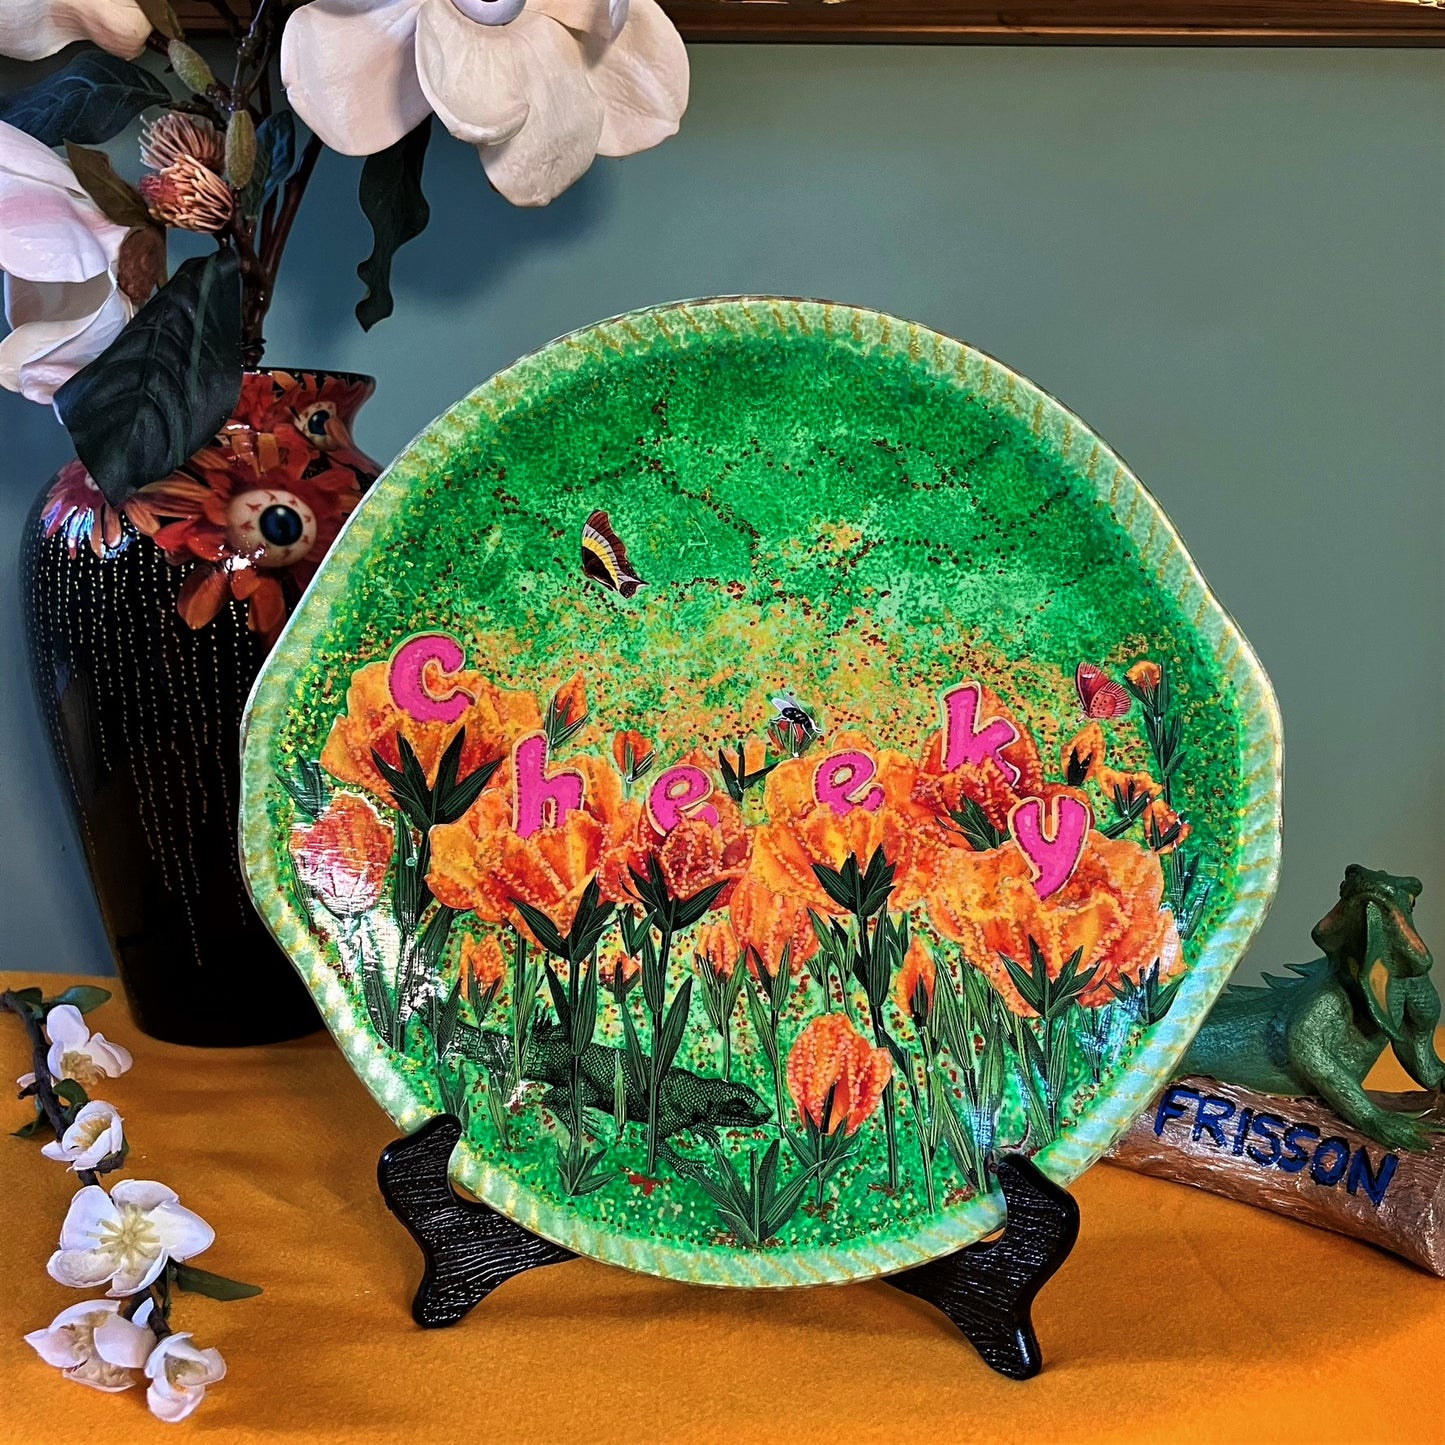 "Cheeky" Wall Plate by House of Frisson, featuring a collage with letters coming out of flowers forming the word "cheeky", and a lizard, on a green background. Showing plate on a plate stand, resting on a table.